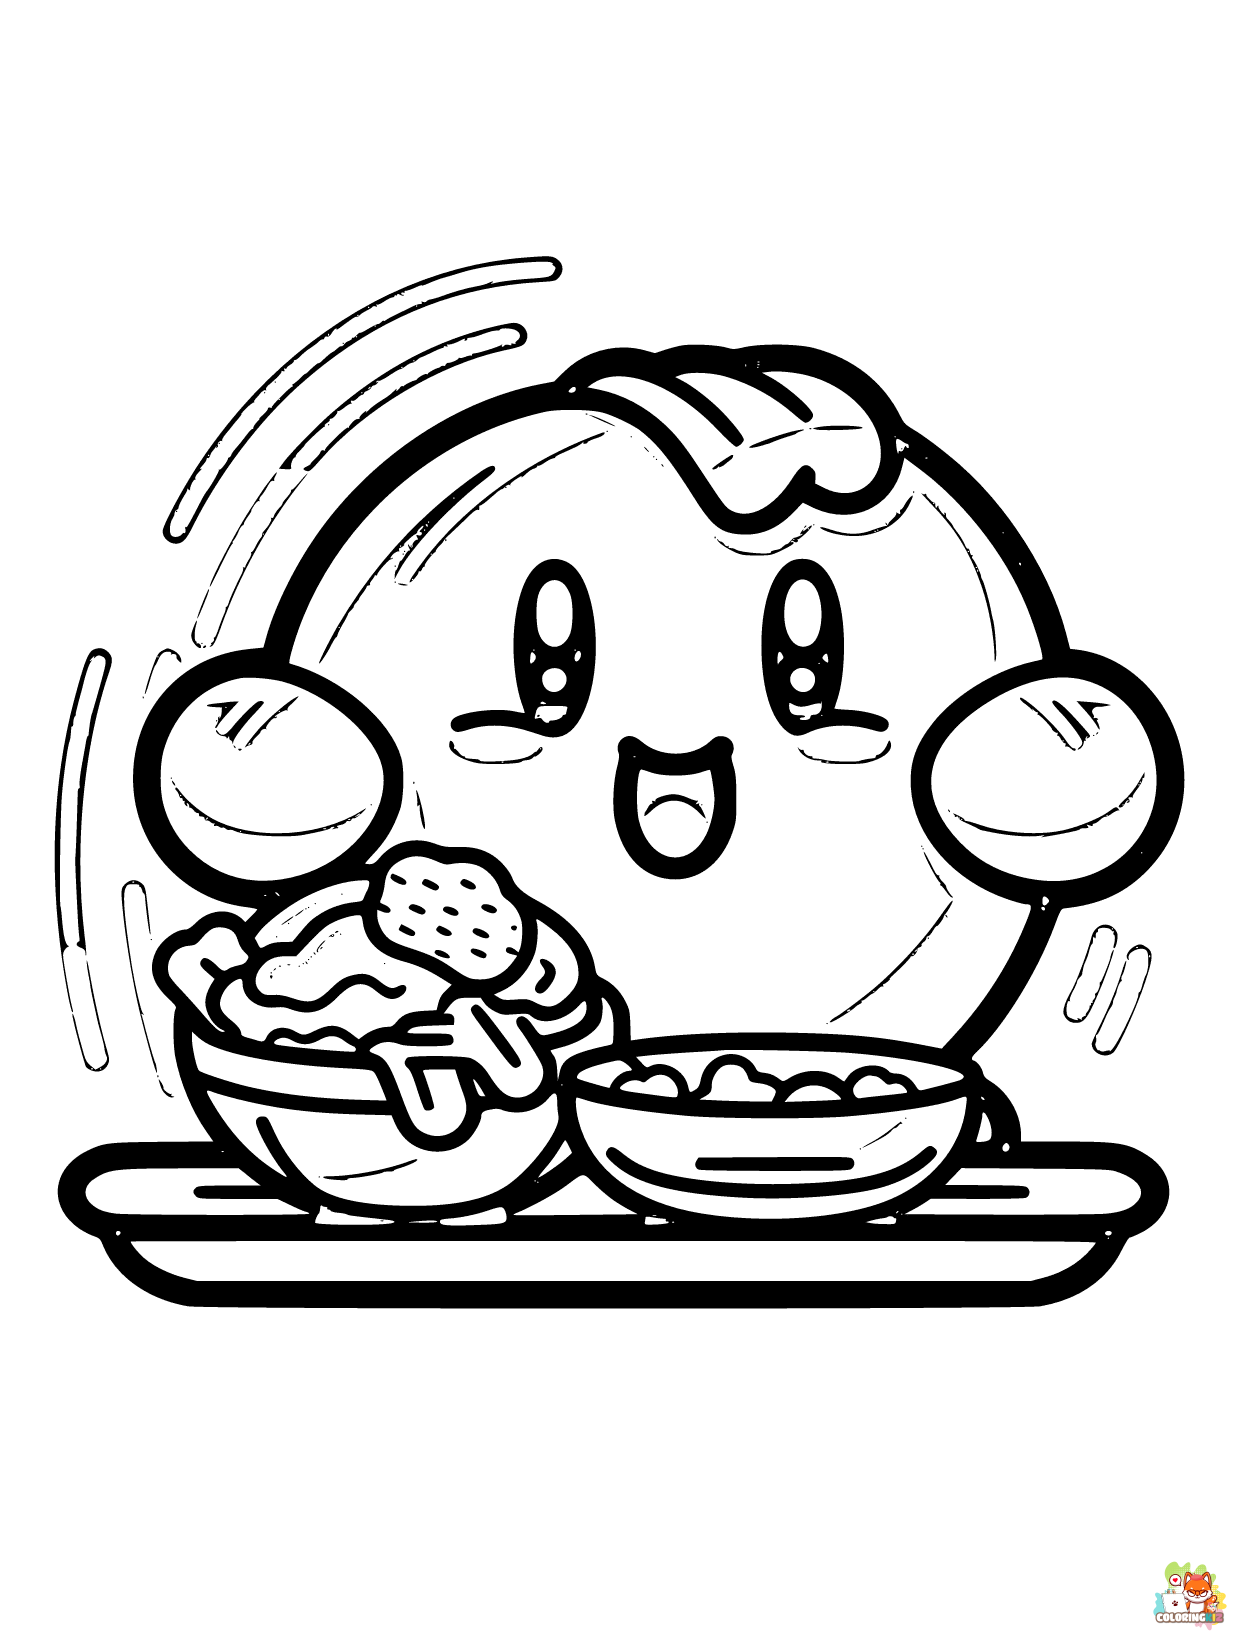 Kirby coloring pages free